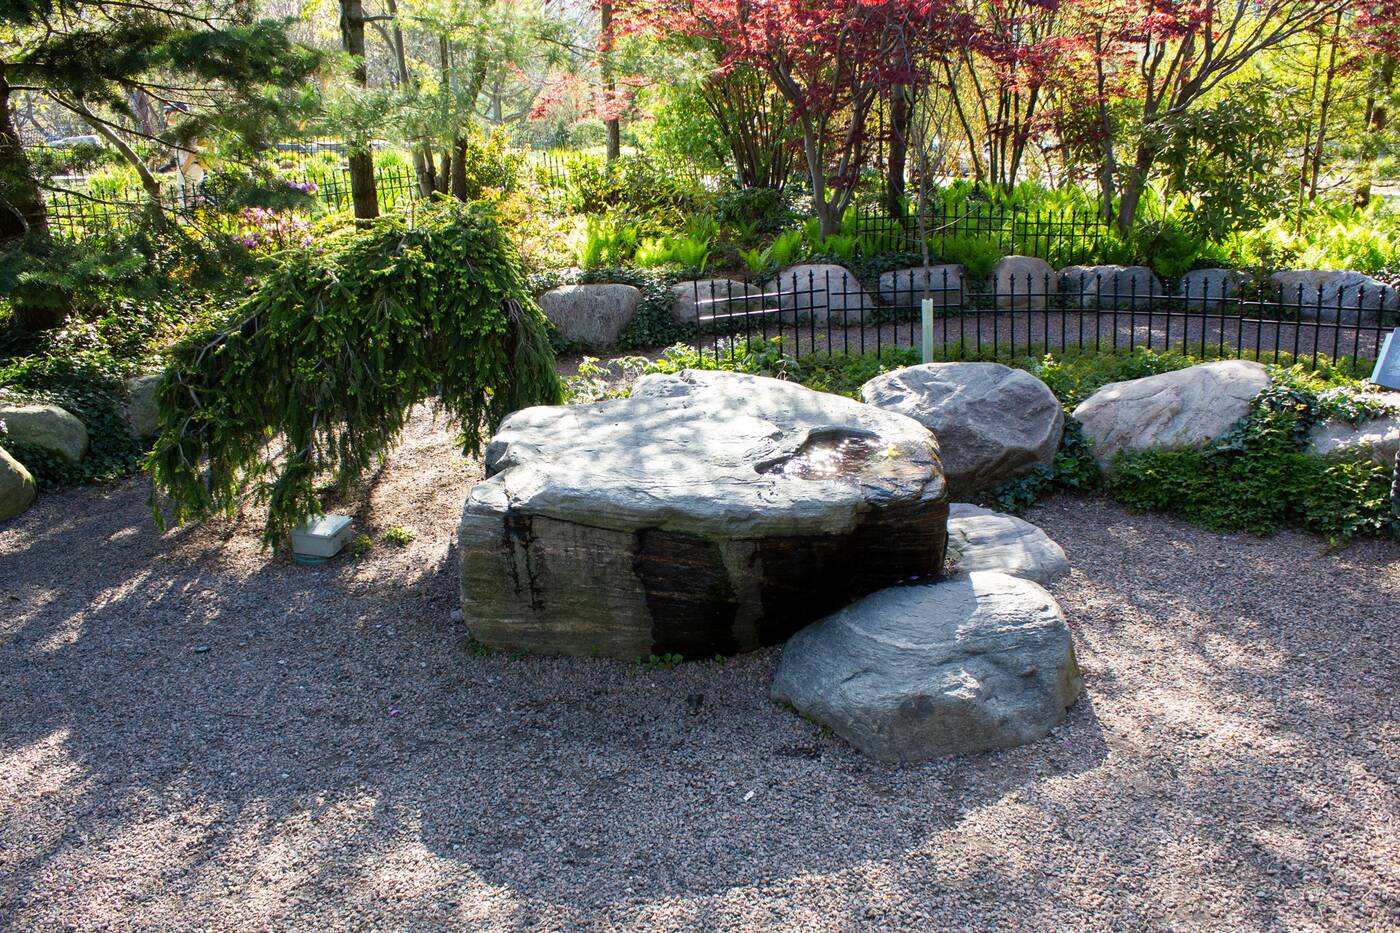 Toronto Music Garden Is The Serene Bach Inspired Park By The